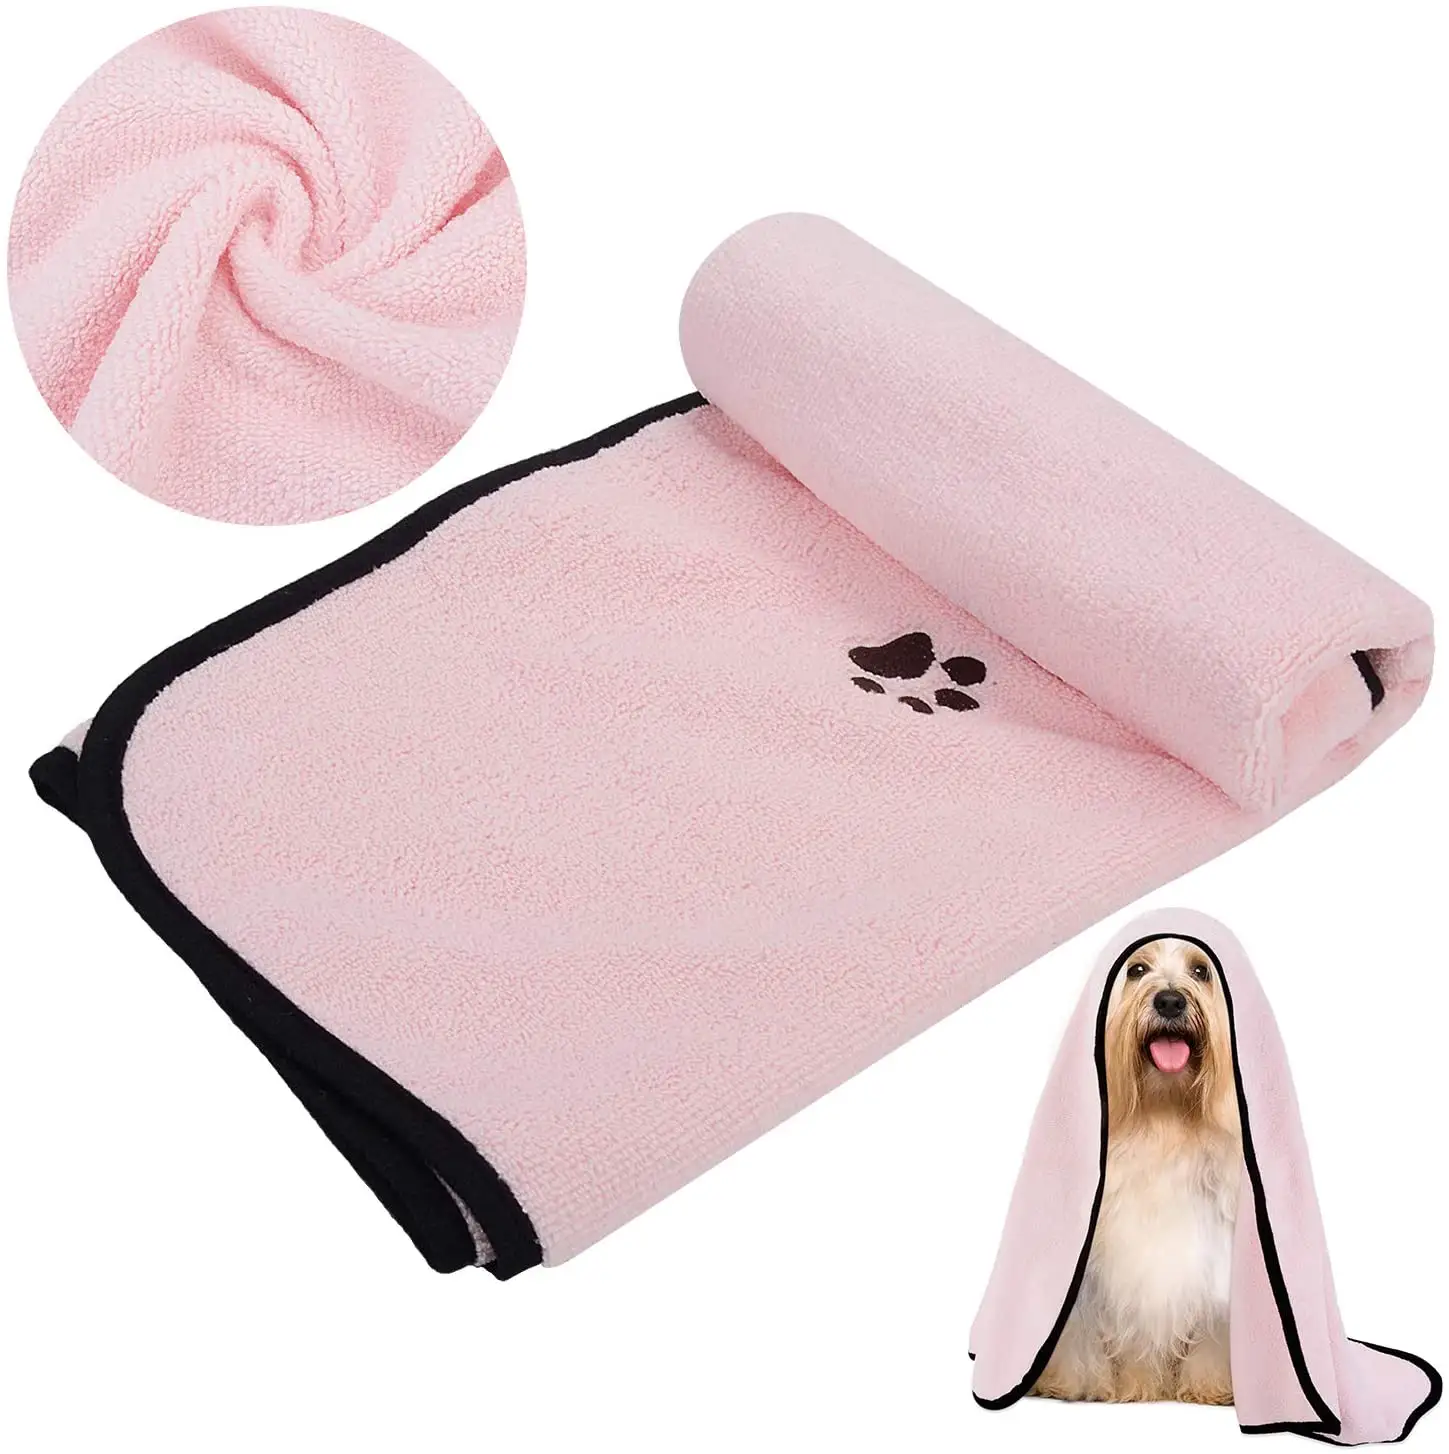 Dogs & Cats Hydrophil Soft Microfibre Pet Grooming Towel